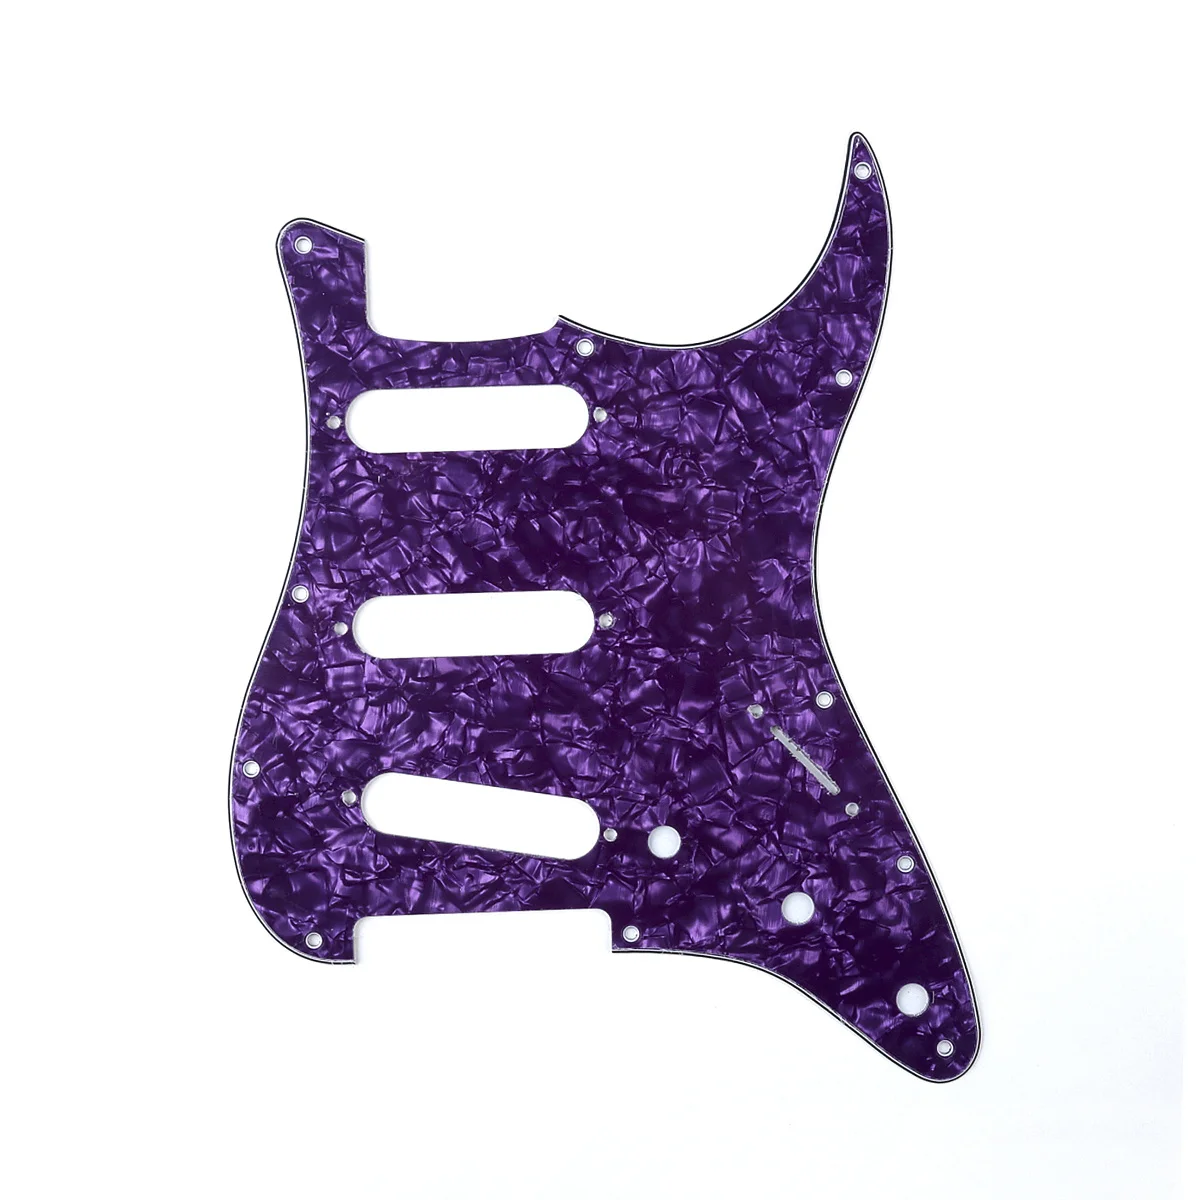 

Musiclily SSS 11 Hole Strat Guitar Pickguard for Fender USA/Mexican Made Standard Stratocaster Style, 4Ply Purple Pearl